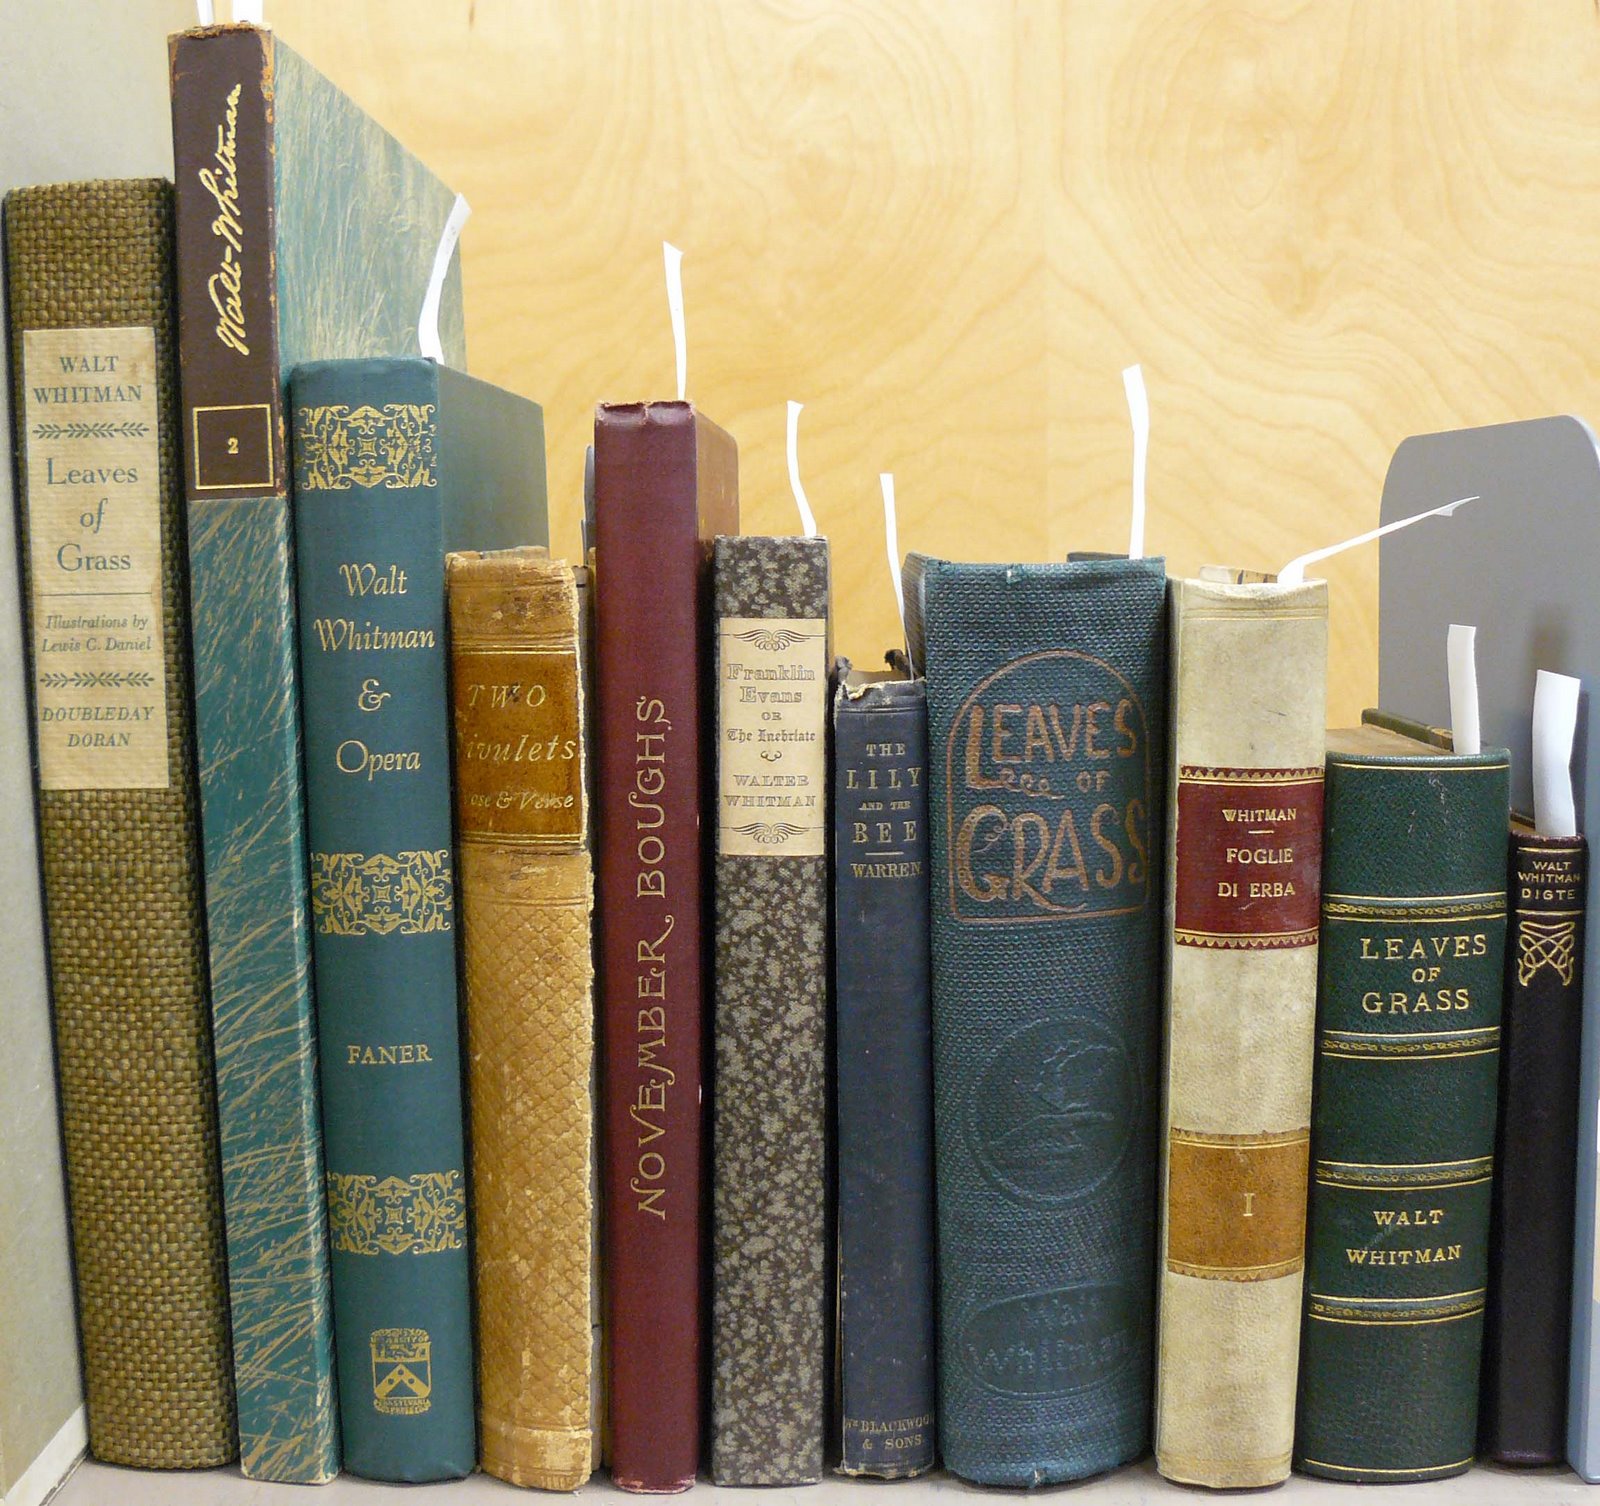 A shelf of books in the Walt Whitman collection